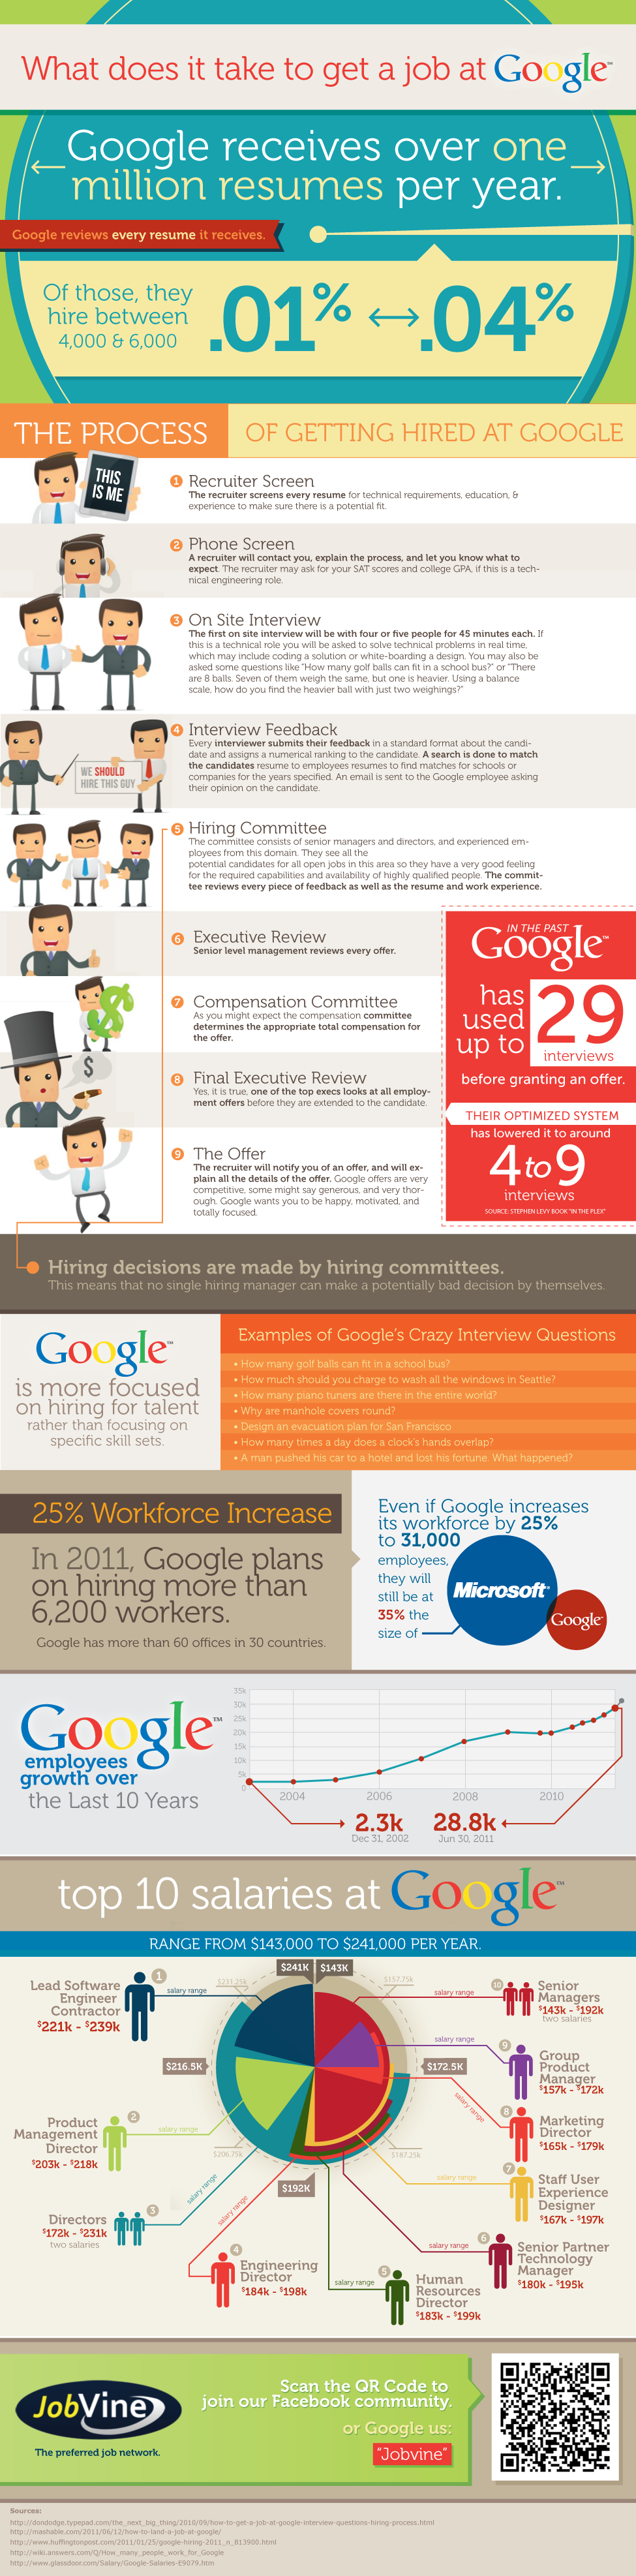 How To Get A Job In Google (Infographic)